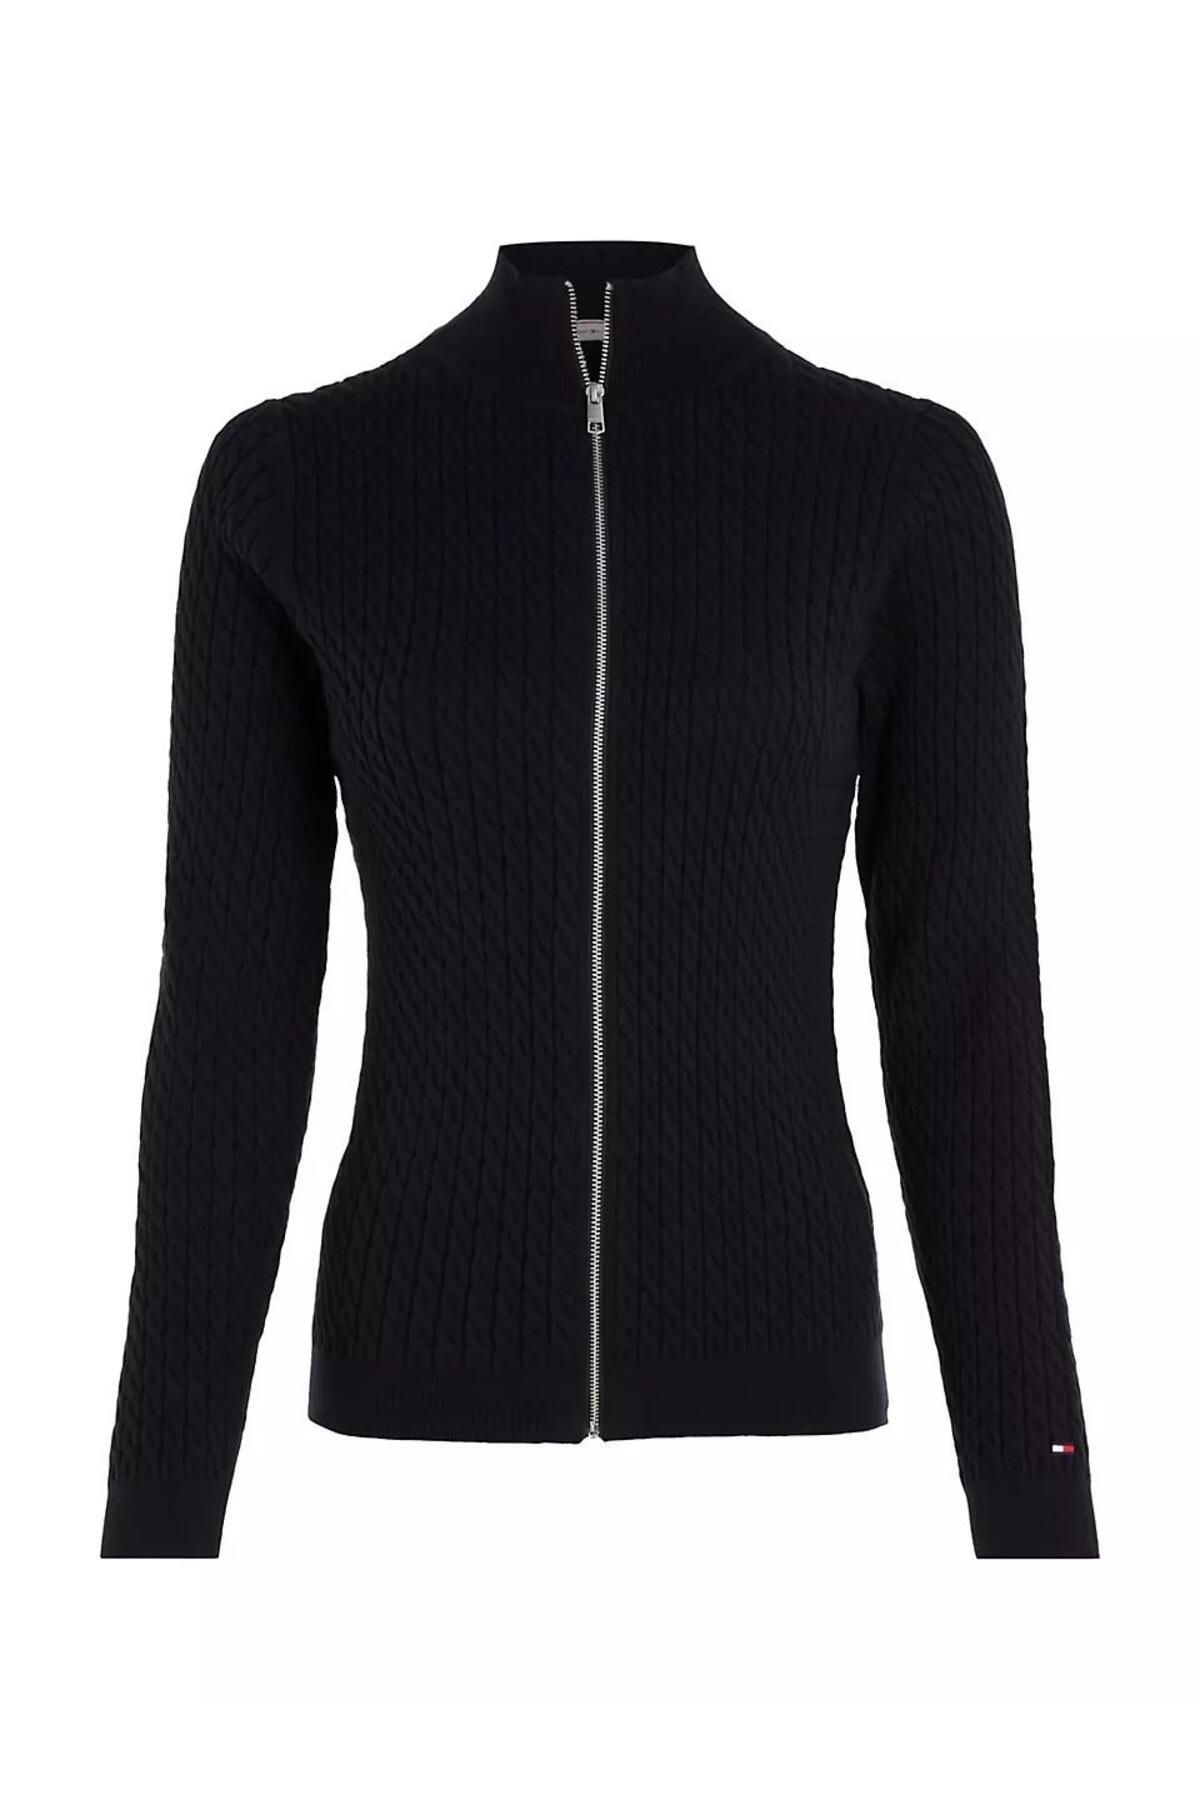 Tommy Hilfiger SKINNY CABLE ZIP CARDIGAN